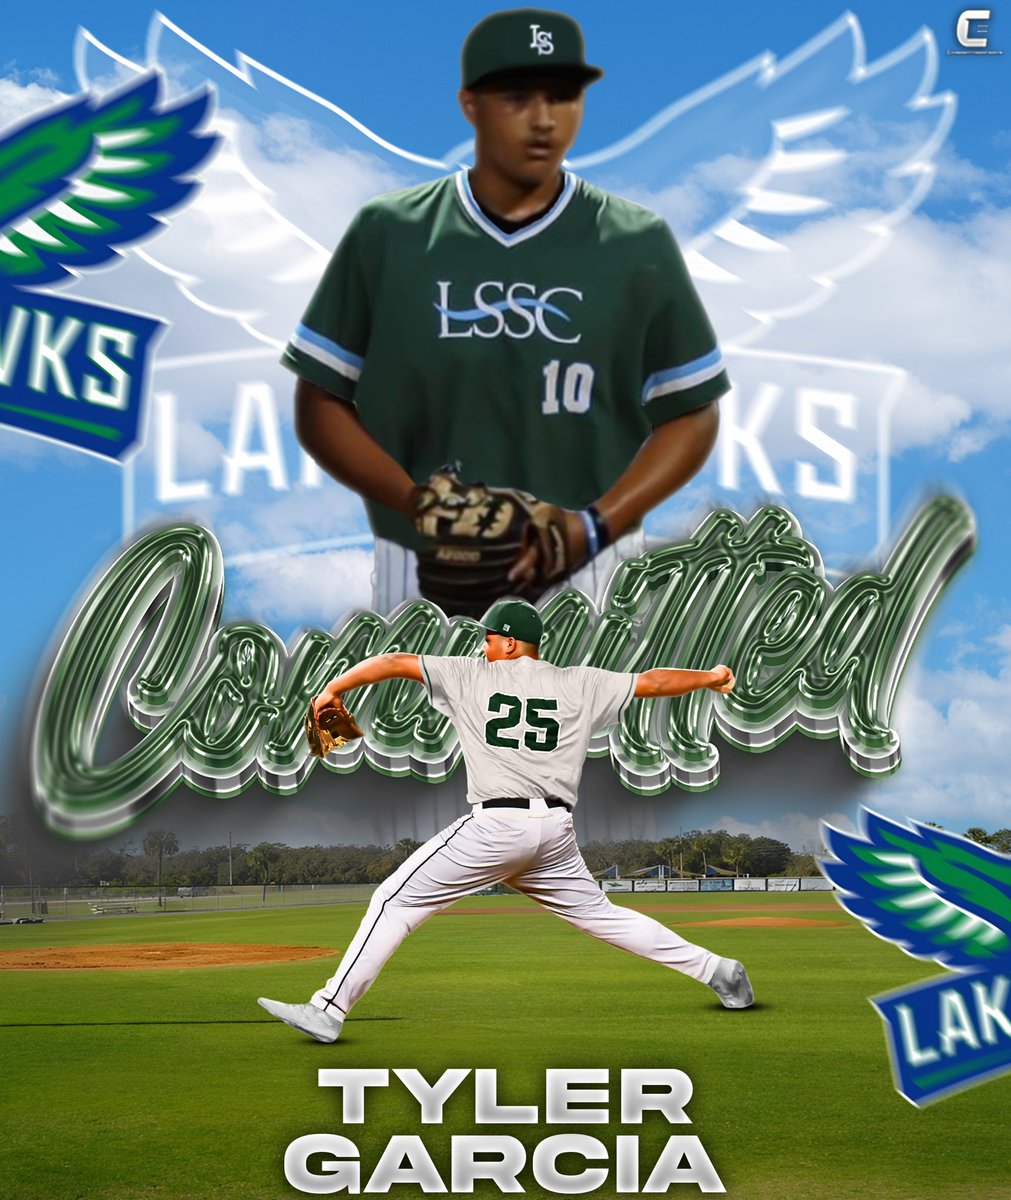 I am excited to officially announce my commitment to Lake Sumter State College. Grateful for this opportunity, and I'd like to thank my coaches, teammates and family who have supported me along my journey. Go Lake Hawks! @RBillings13 @allendegil17 @oviedo_baseball @JesseLitsch